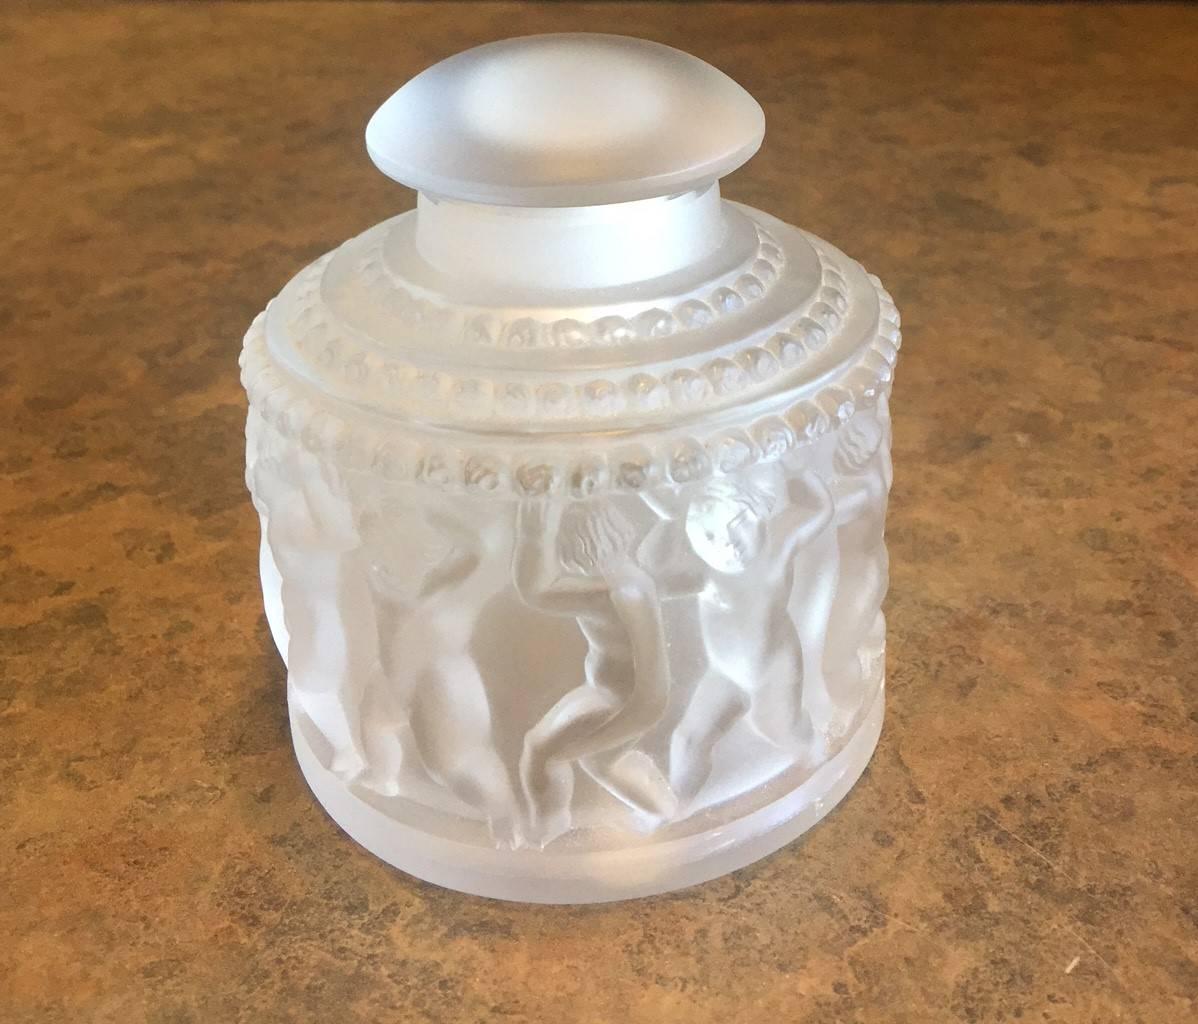 Gorgeous frosted crystal powder jar with cherub motif by Lalique of France, circa 1970s. Measures: The jar is 3.5